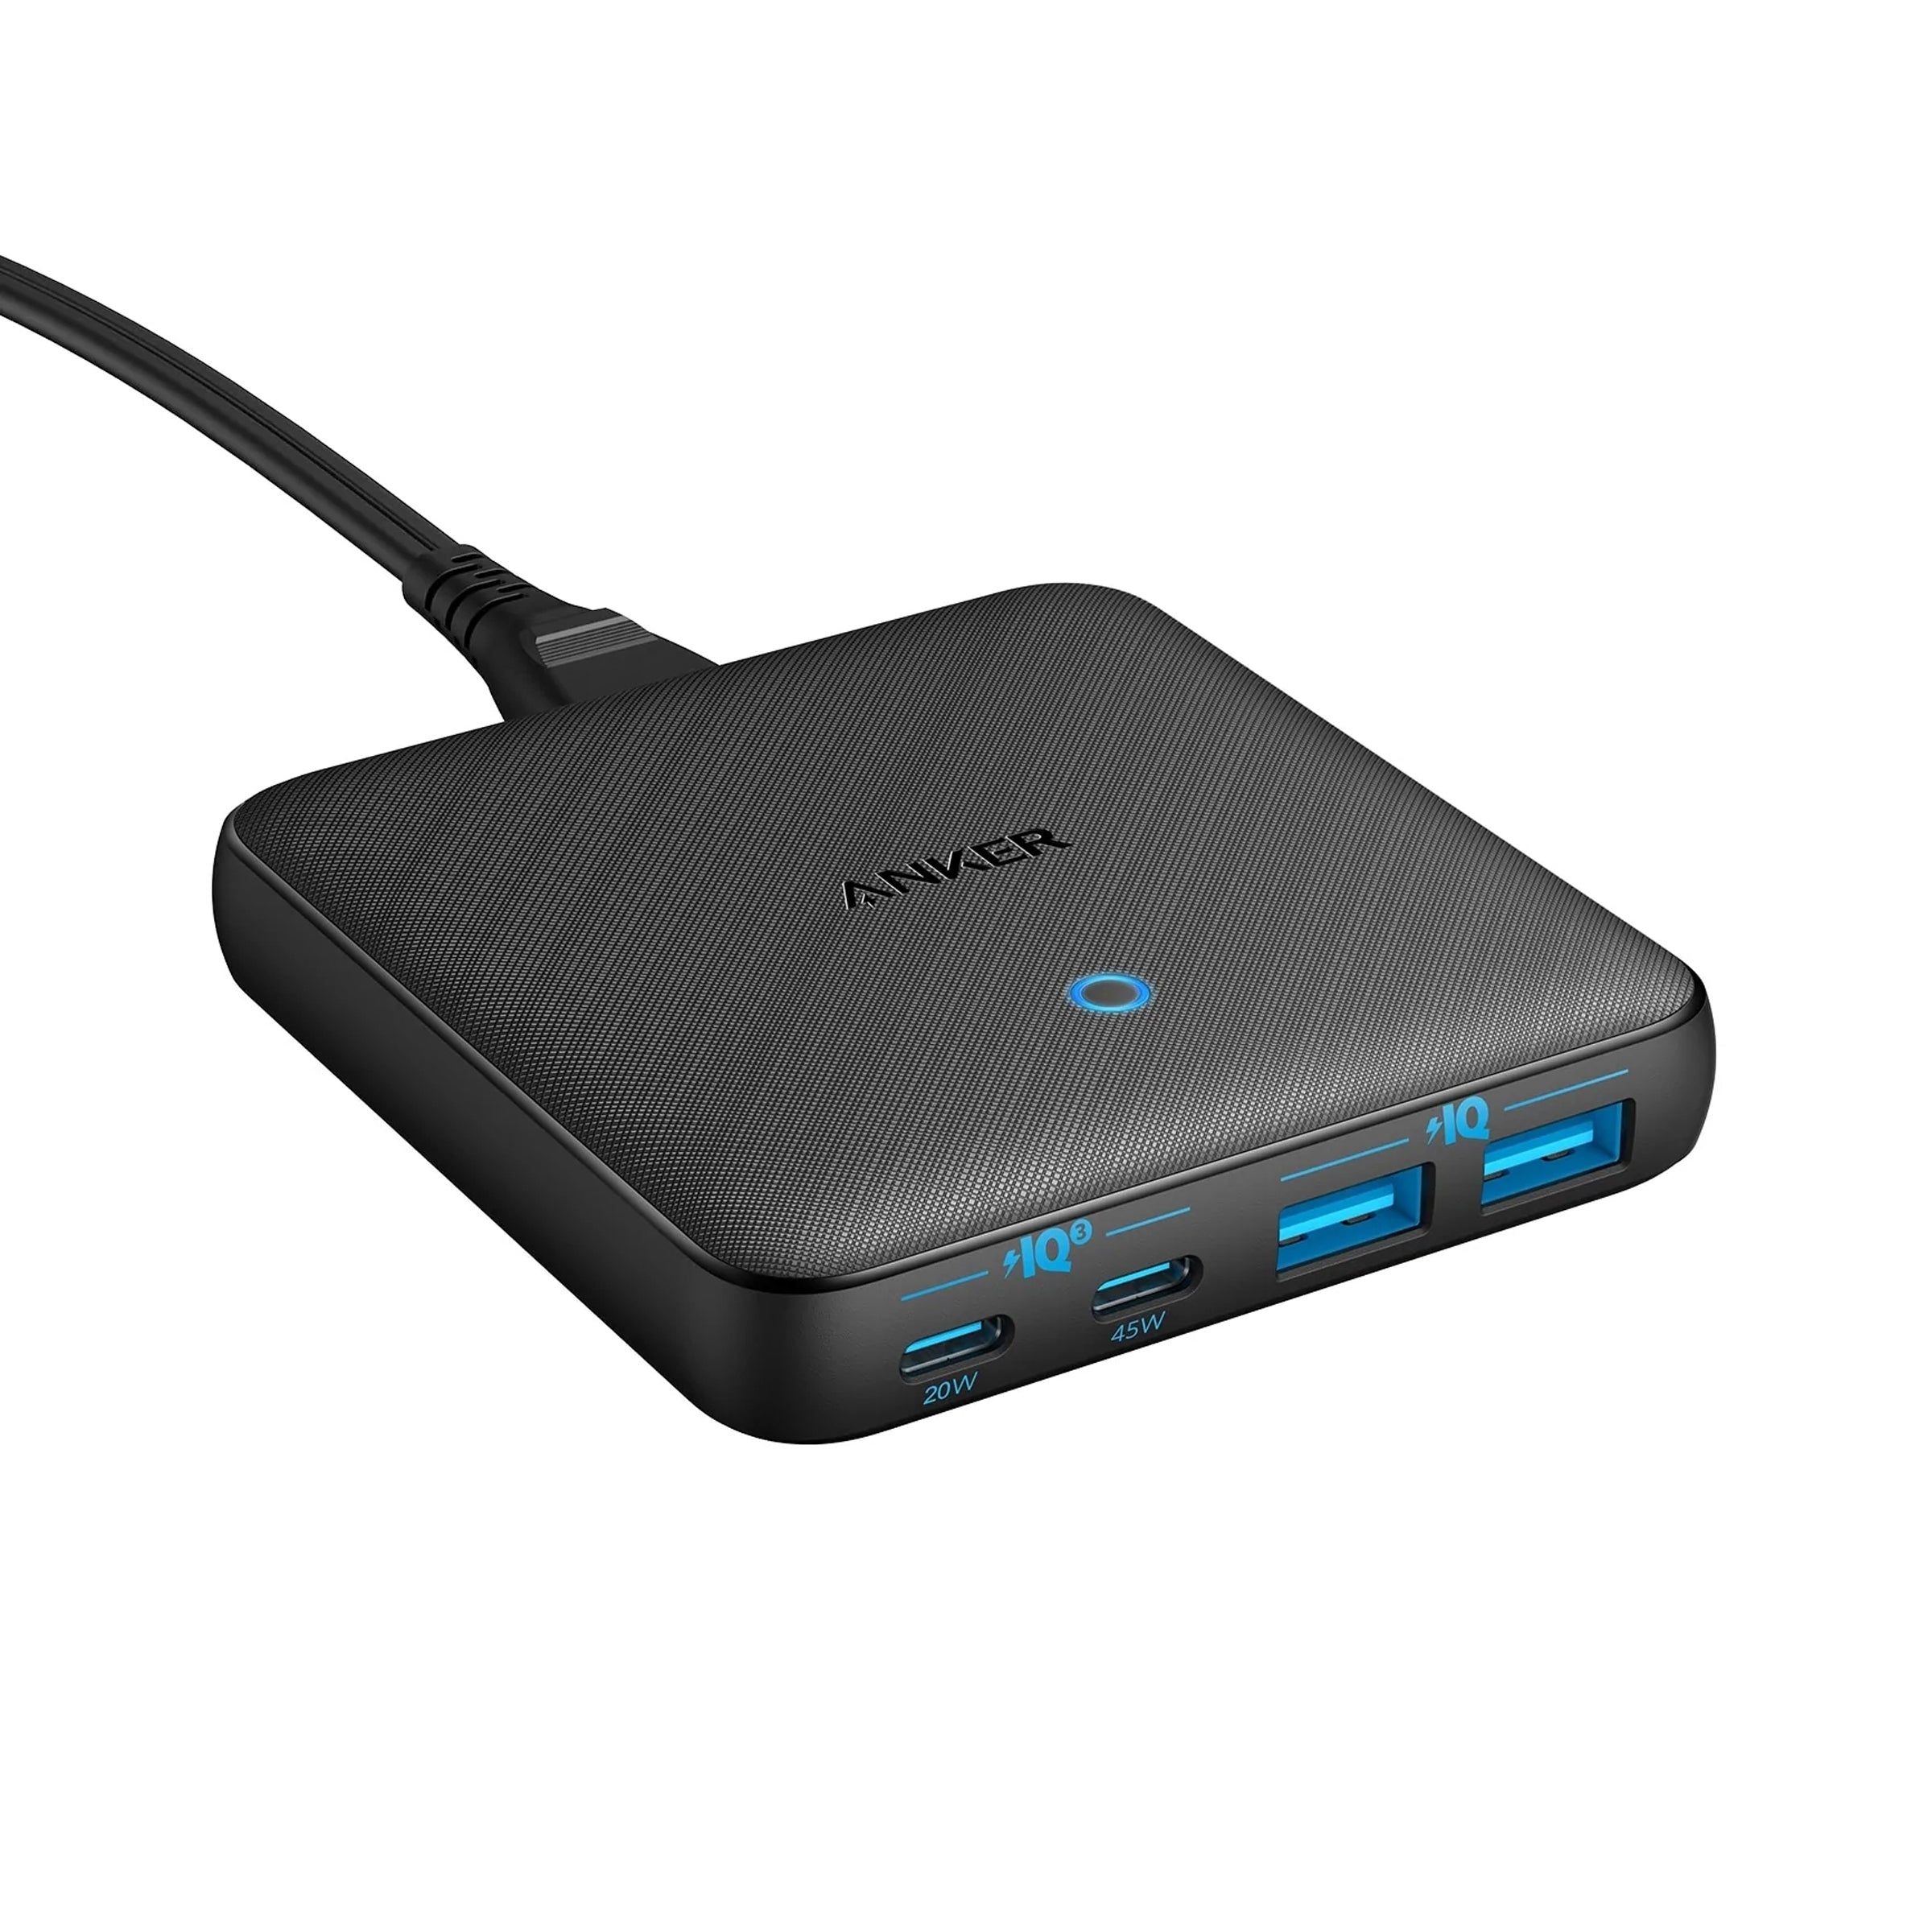 HP USB-C Notebook Power Bank Specifications